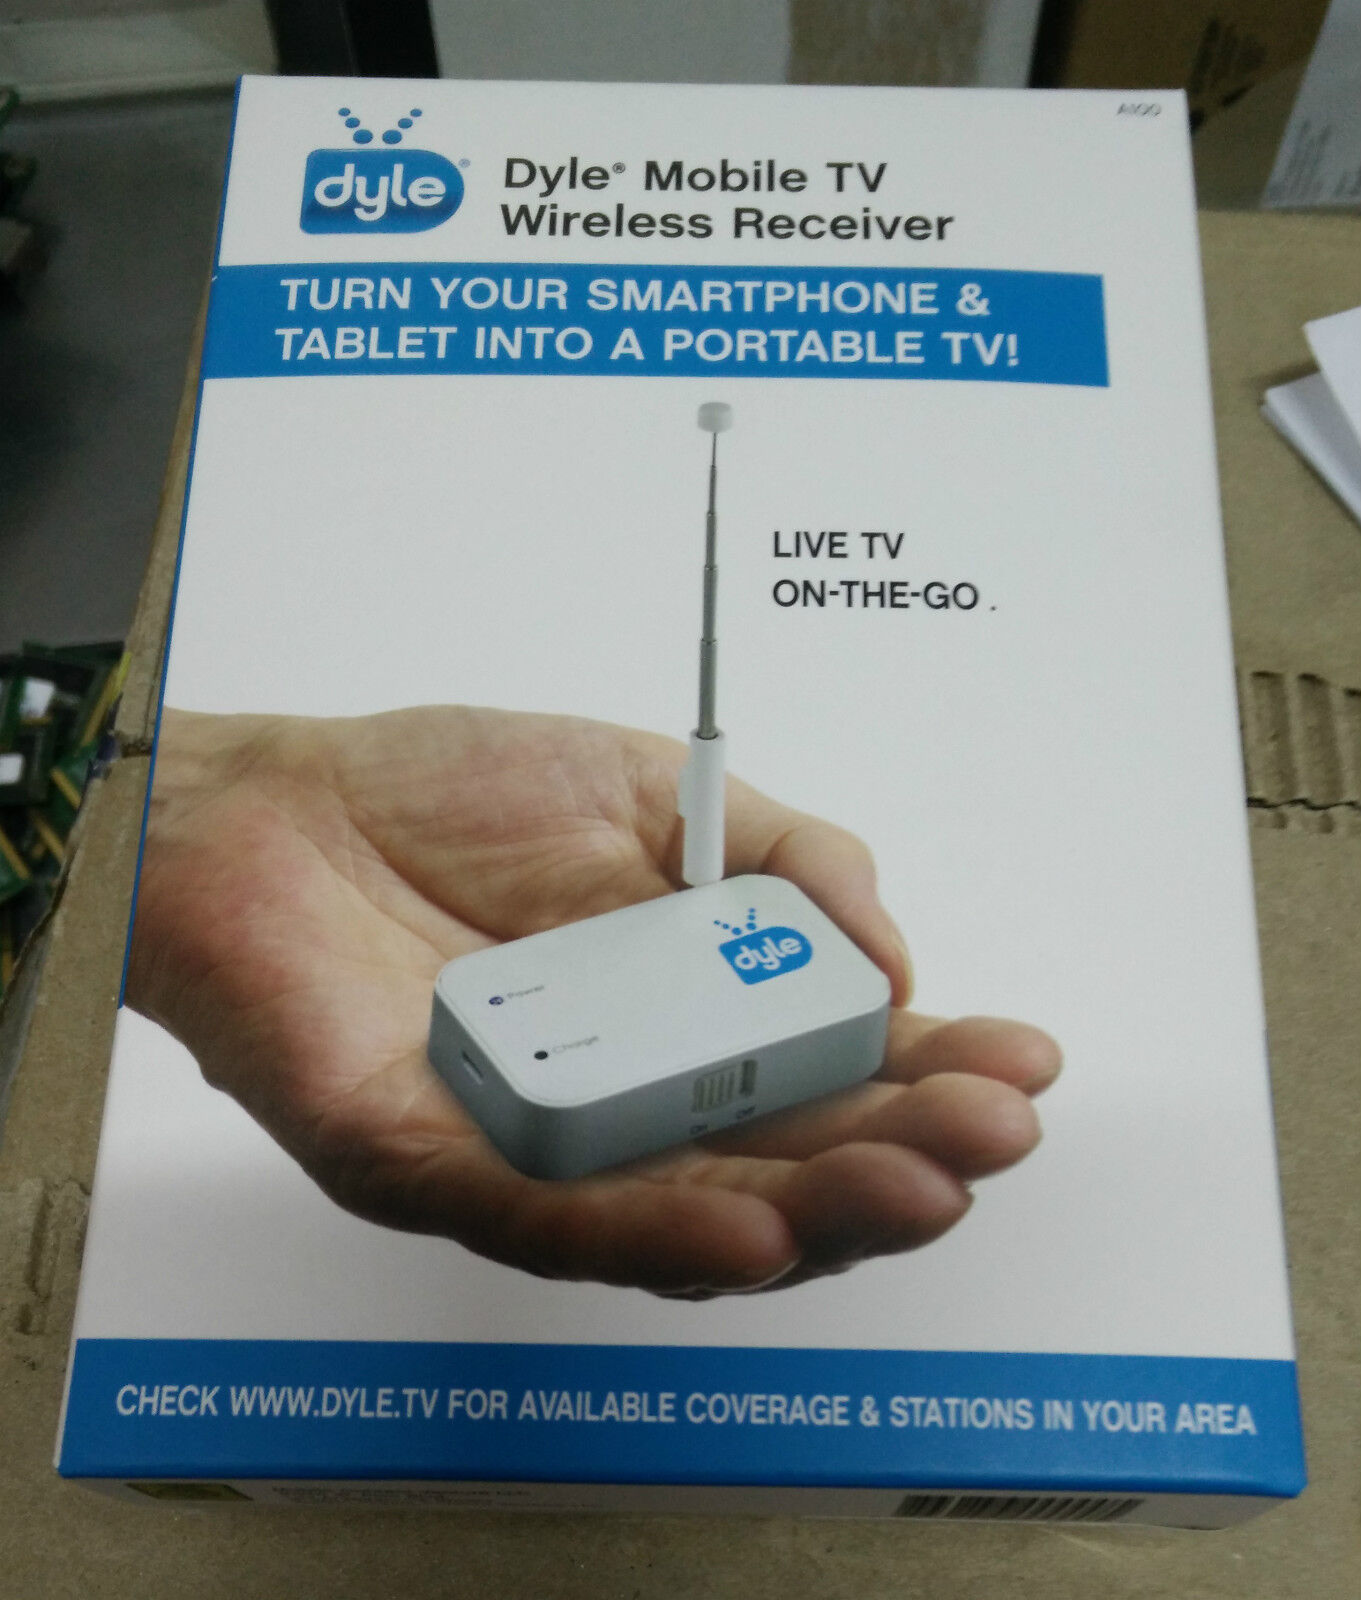 Dyle Mobile TV Wireless Receiver, Live-TV ON-THE-GO - NEW in Box